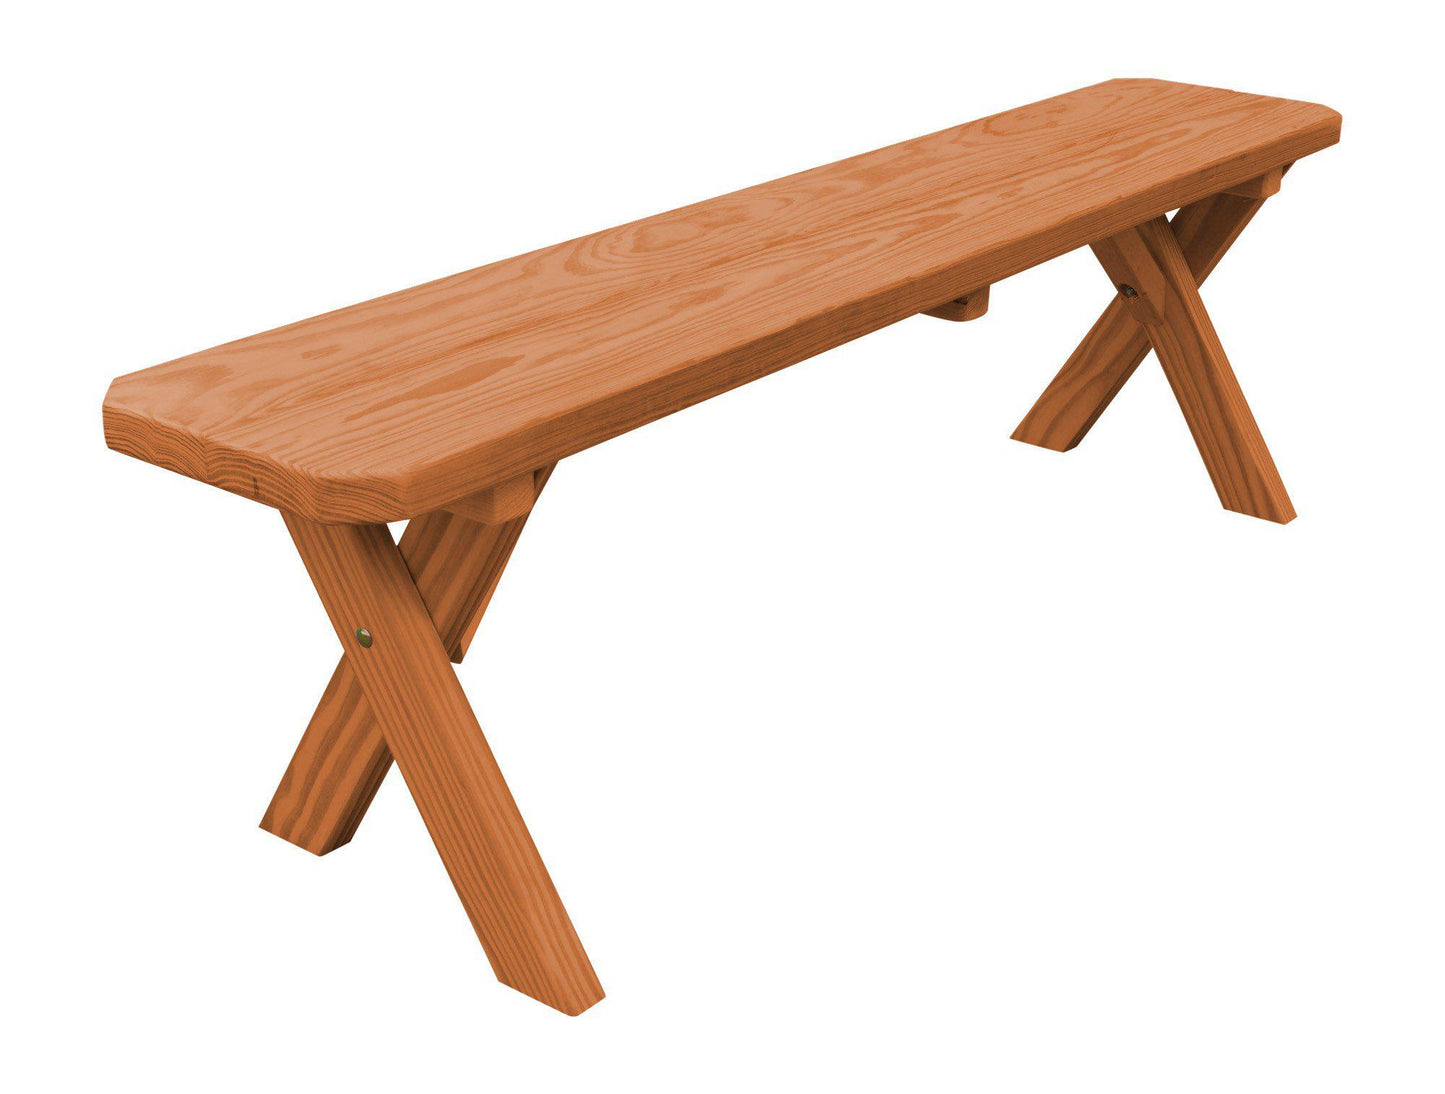 A&L Furniture Co. Yellow Pine 55" Crossleg Bench Only - LEAD TIME TO SHIP 10 BUSINESS DAYS